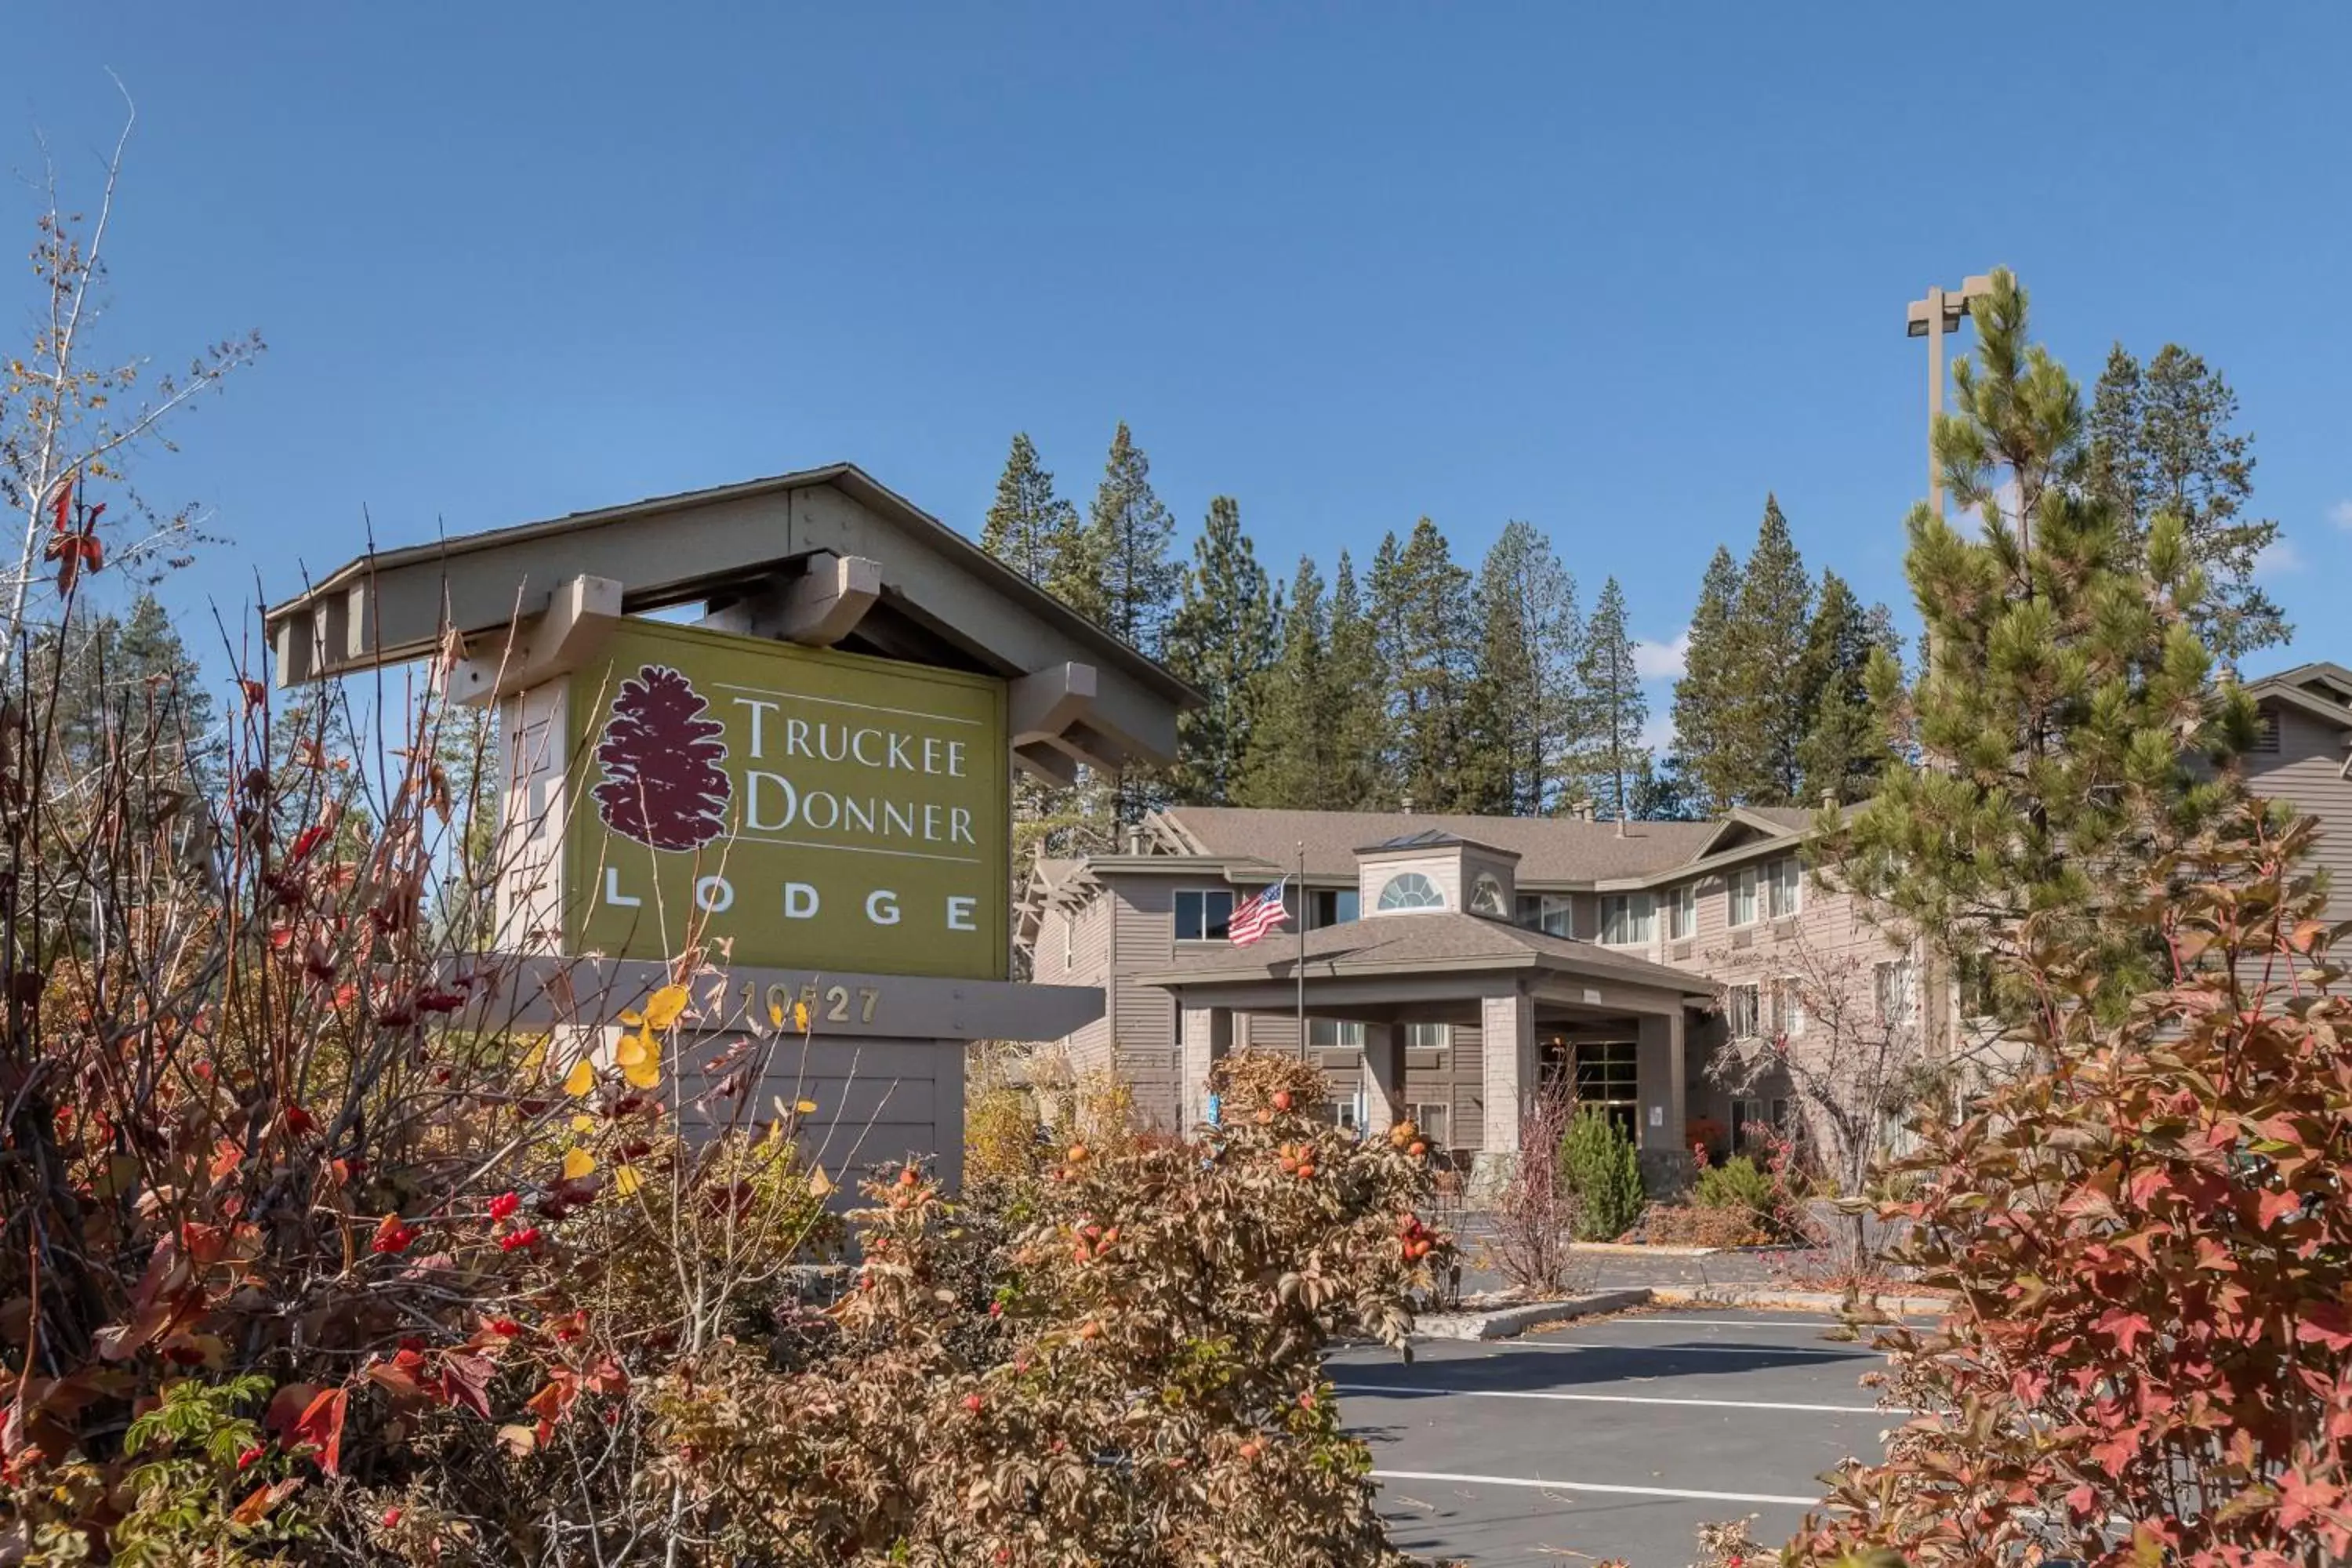 Property building in Truckee Donner Lodge